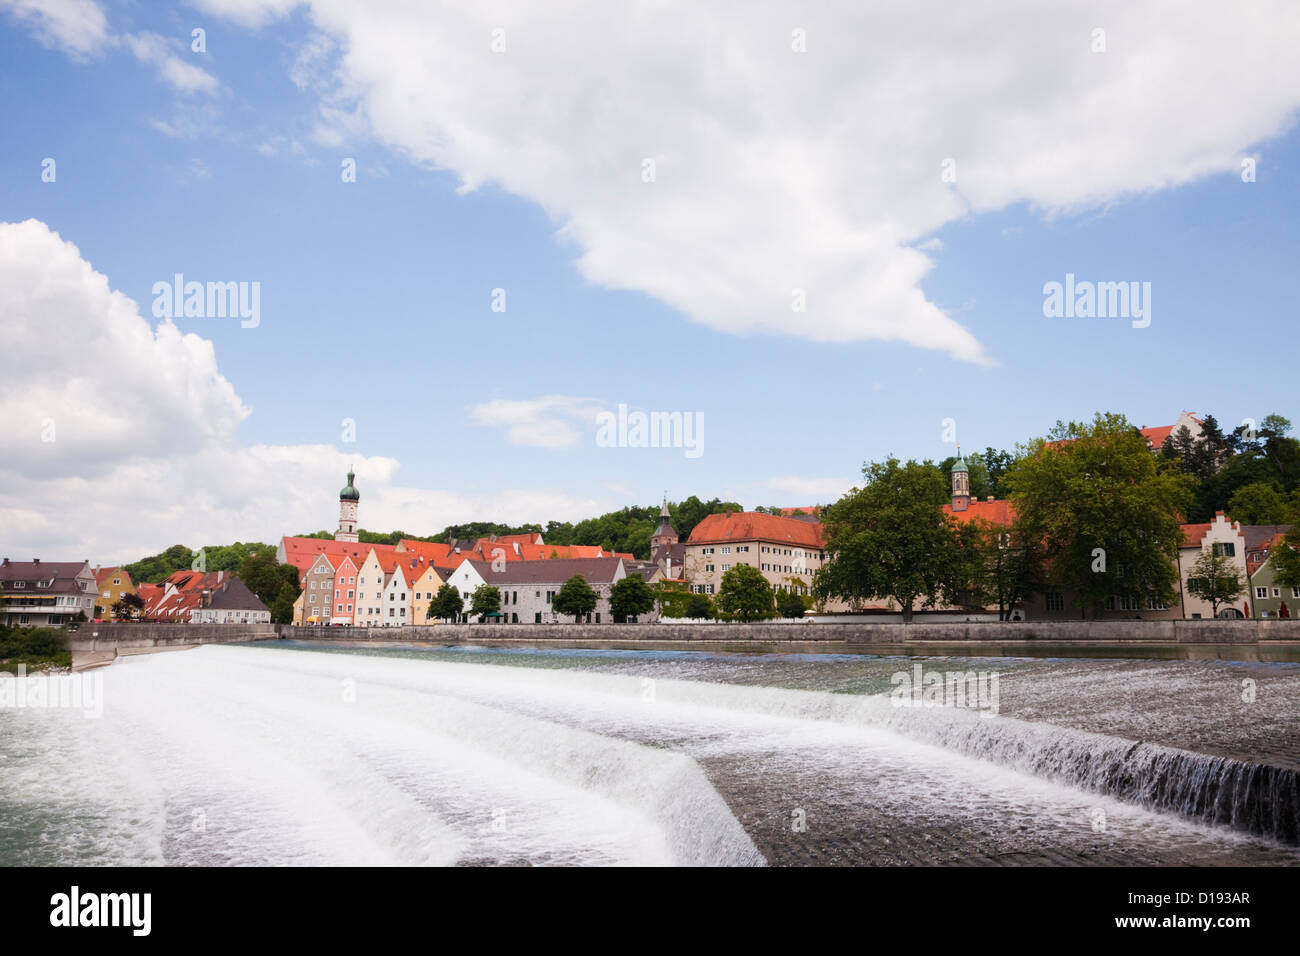 Landsberg am Lech, Bavaria, Germany, Europe. View across the weir in the River Lech to medieval town on the Romantic Route road Stock Photo